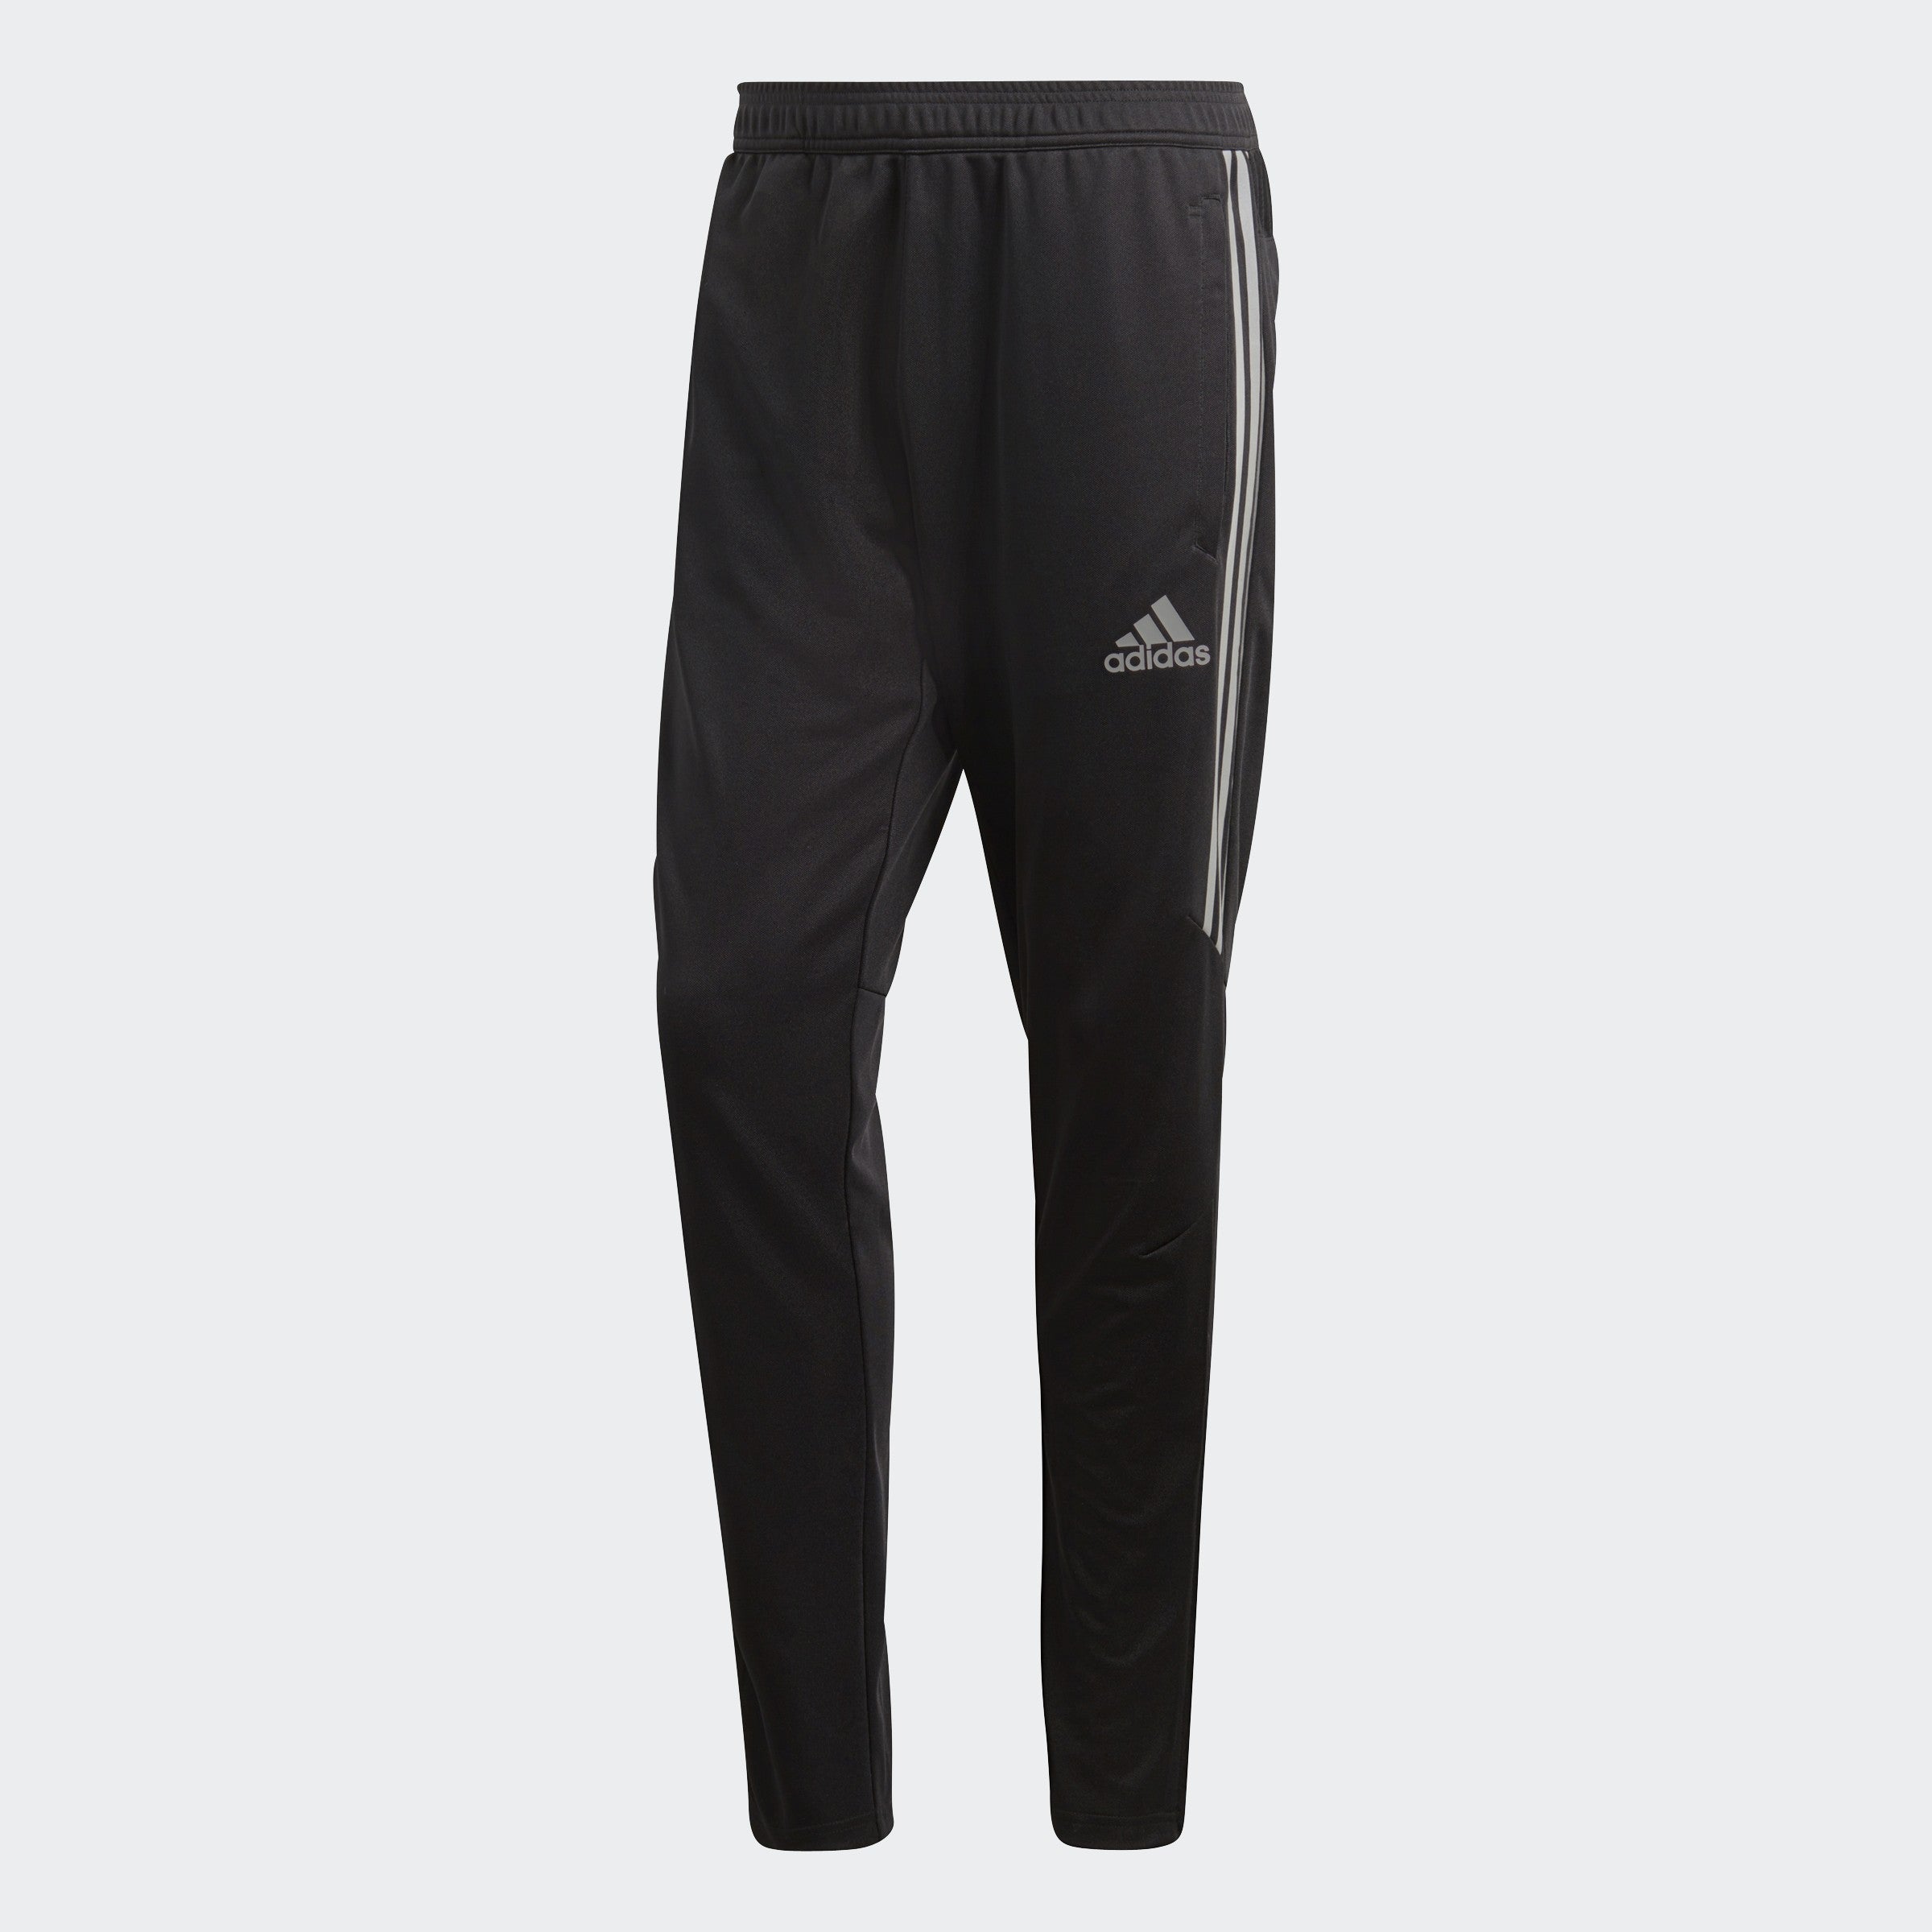 ALL SZN French Terry Pants - Black, Men's Training